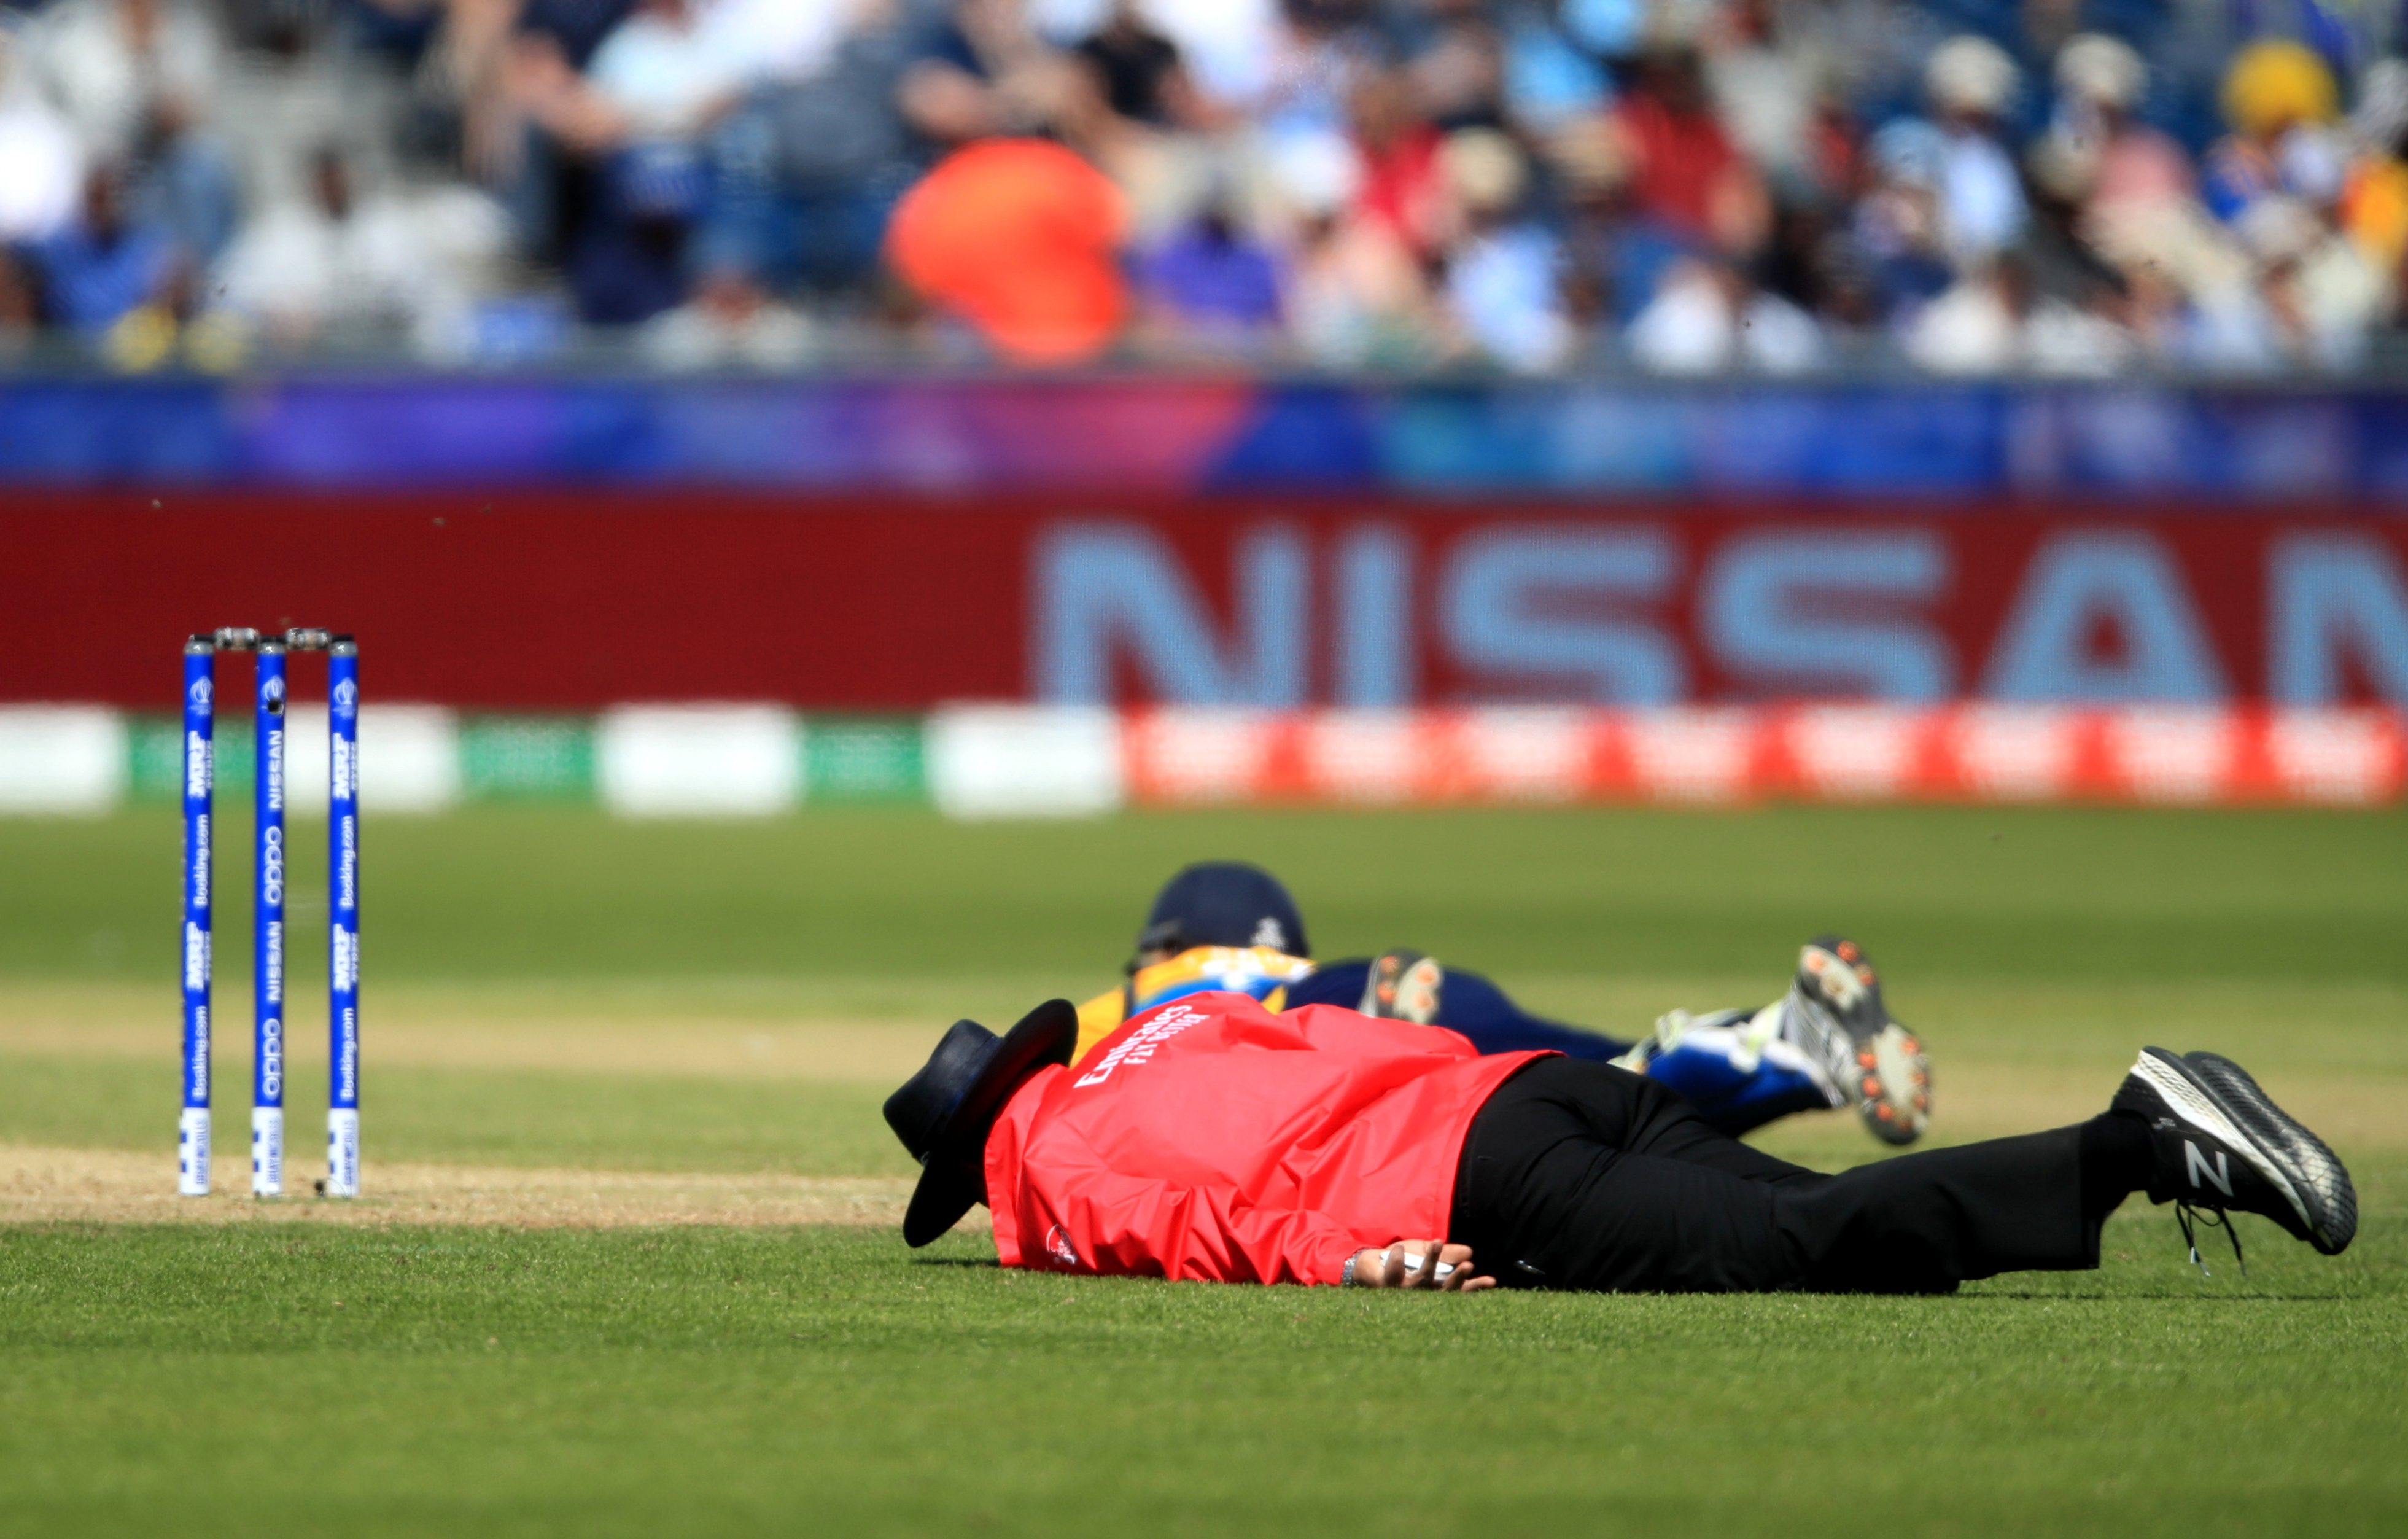 A swarm of bees sweeps over the ground shortly before the end of the innings, forcing players and umpires to lie flat during the ICC Cricket World Cup group stage match at Riverside Durham between Sri Lanka and South Africa